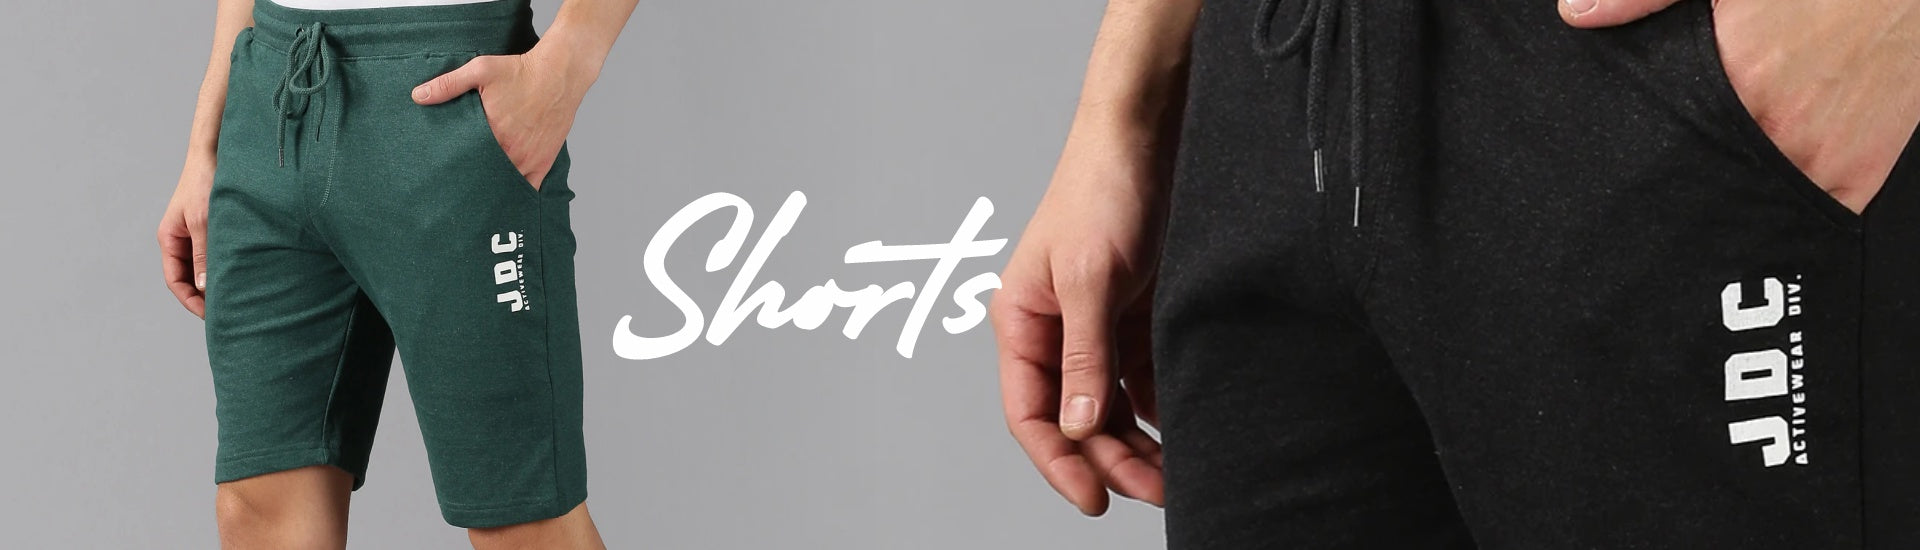 Stylish & Comfortable Shorts Collection